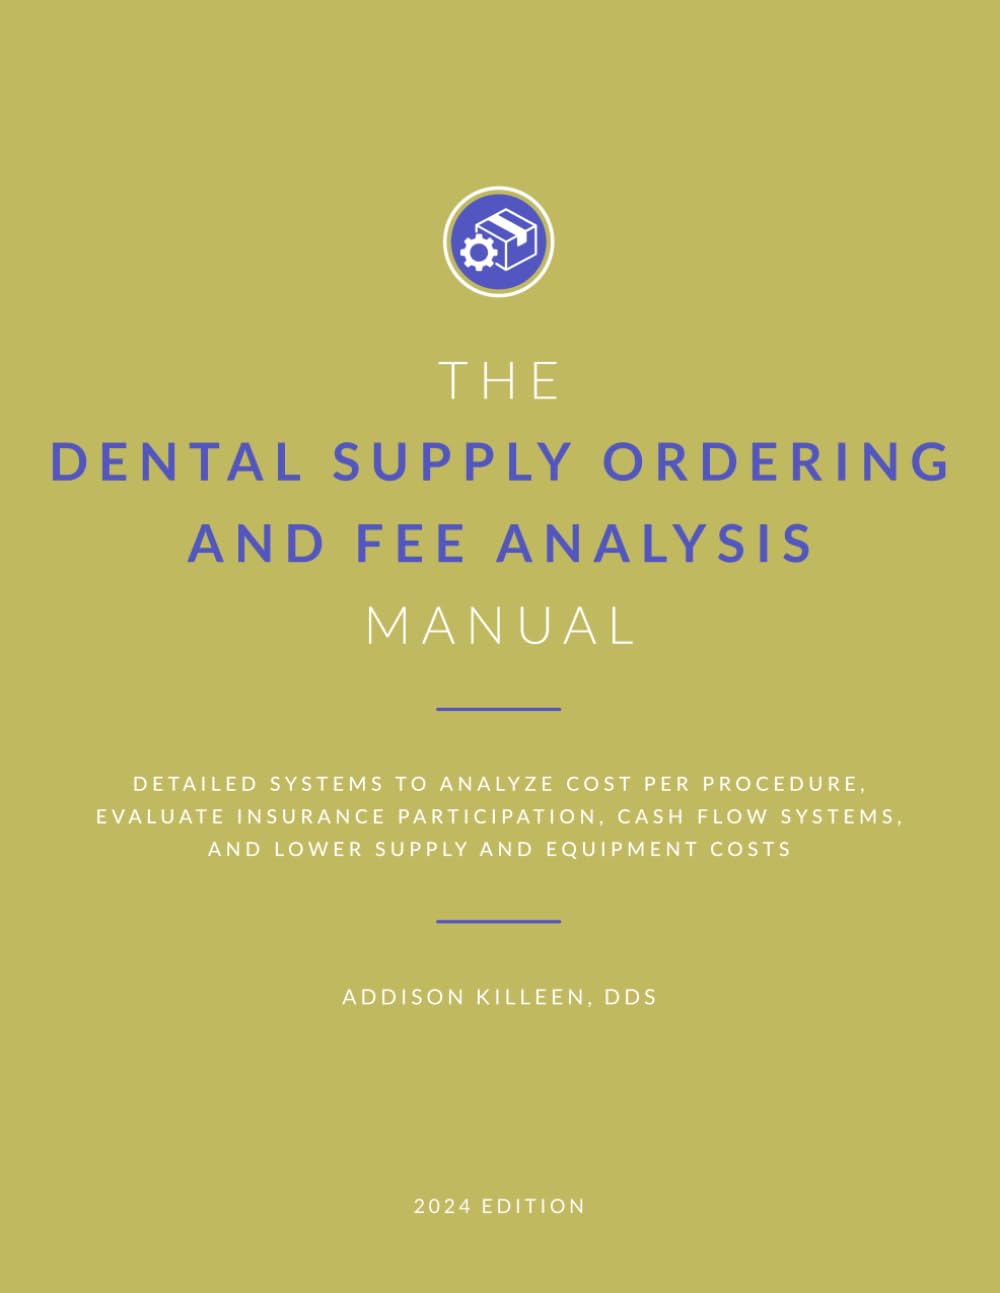 Dental Supply Ordering and Fee Analysis Manual: Detailed Systems to Analyze Cost per Procedure, Evaluate Insurance Participation, Improve Cash Flow ... (Dental Manuals from Dental Success Network)